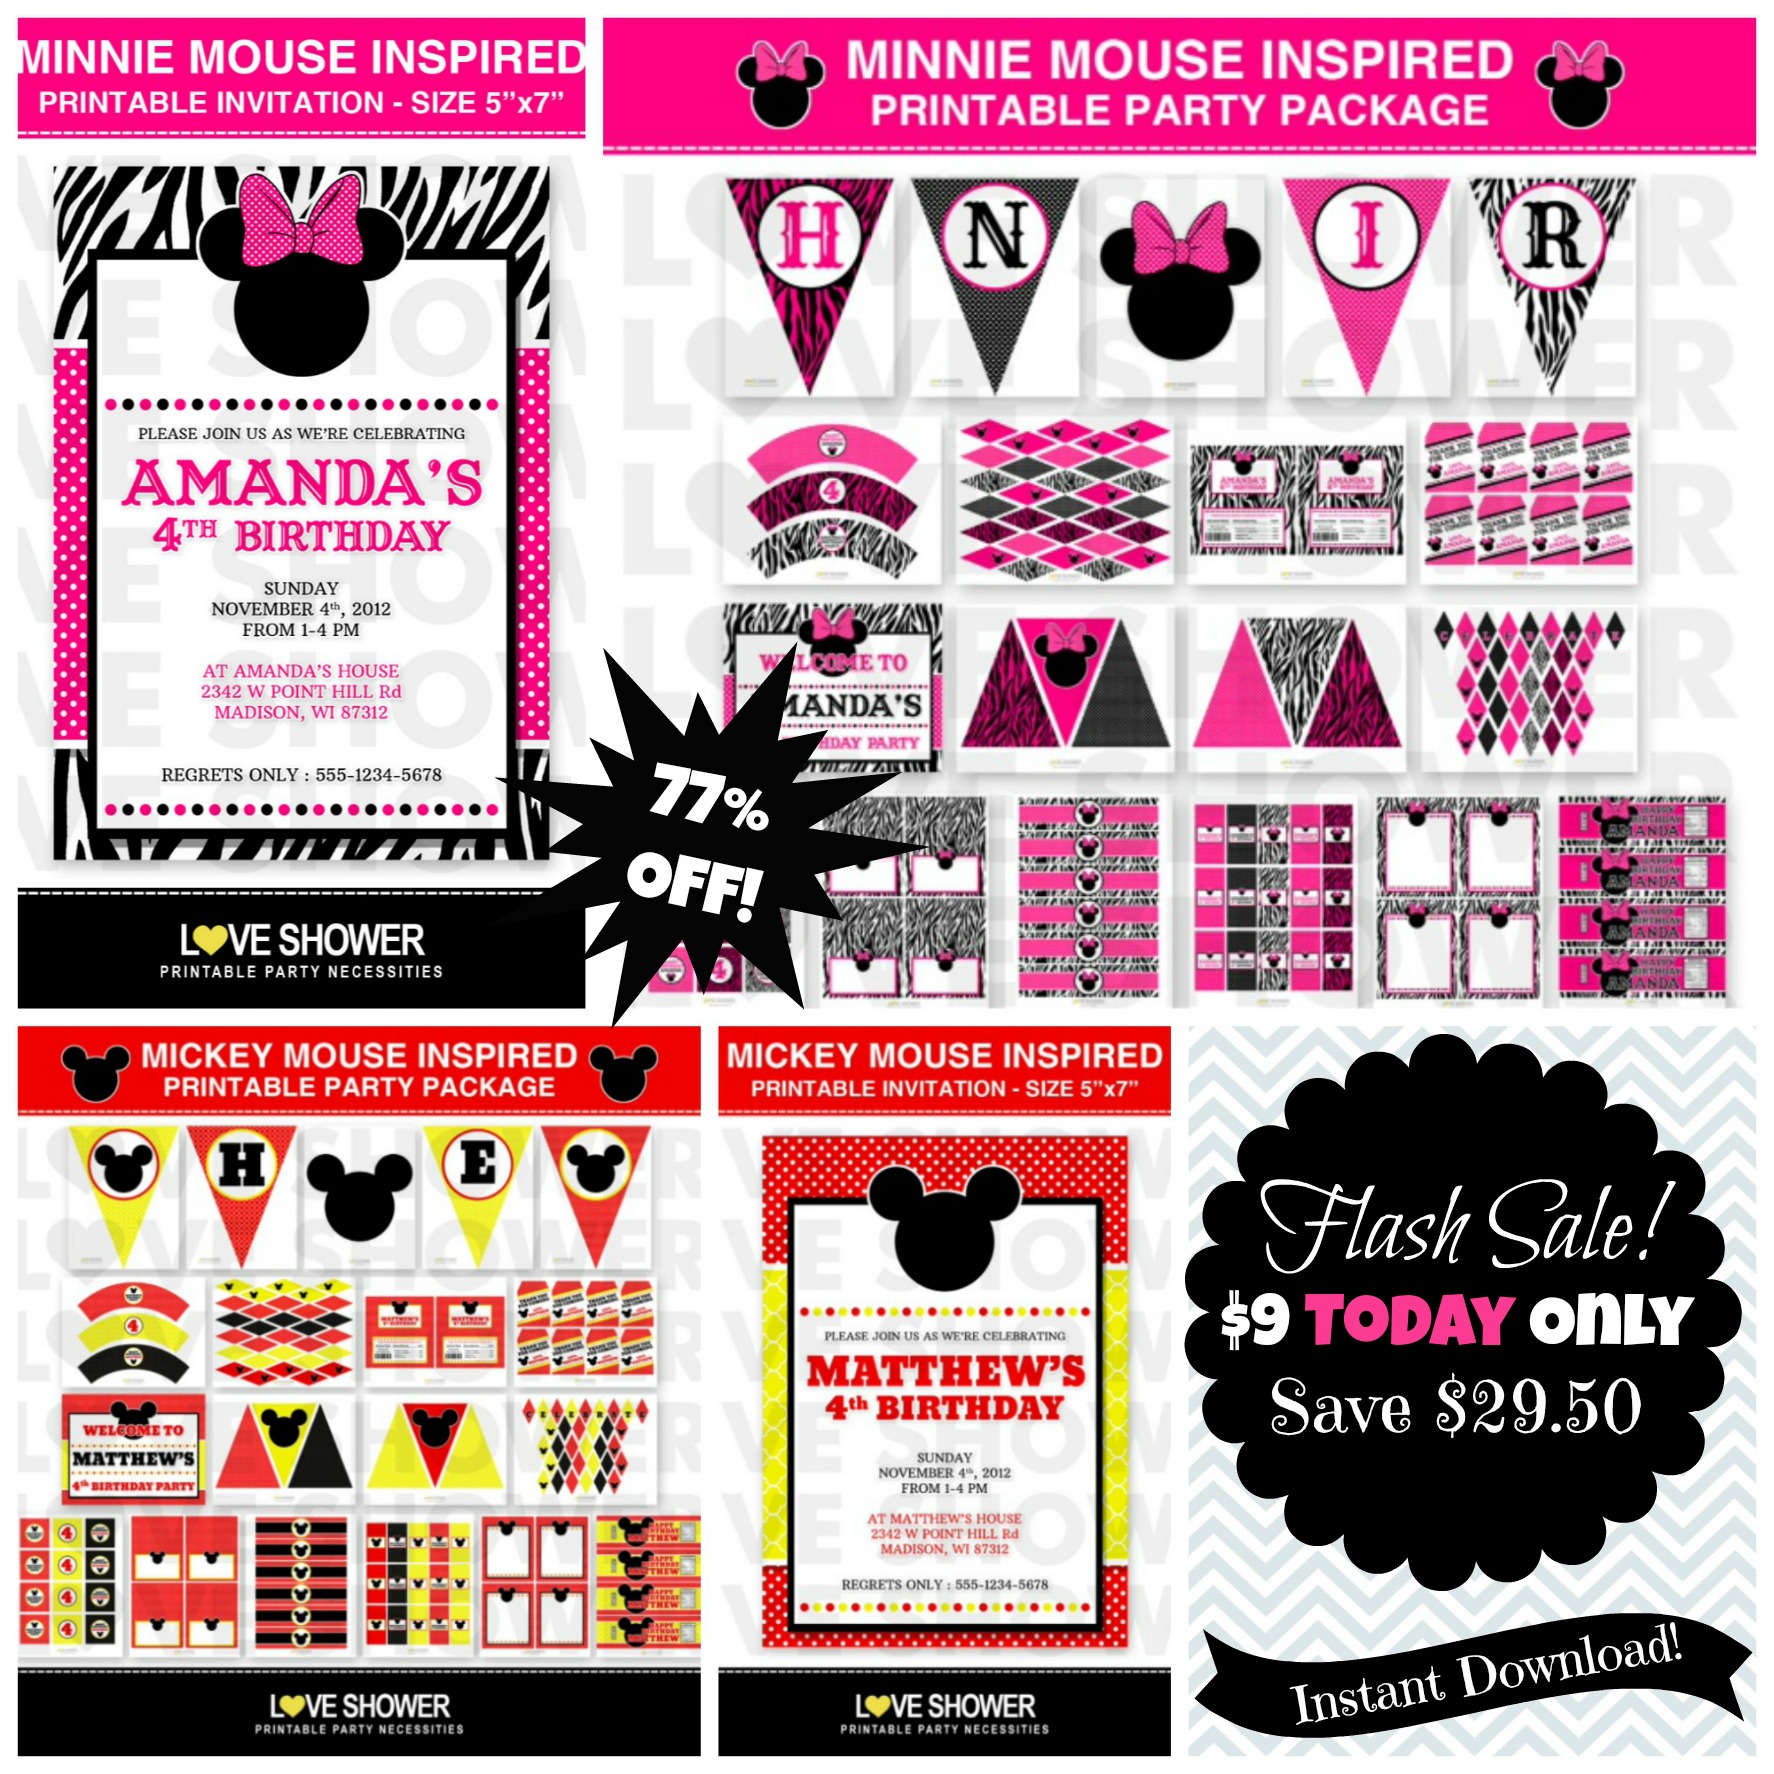 $9 Today! Minnie and Mickey Mouse PRINTABLE Party {save $29.50 ...